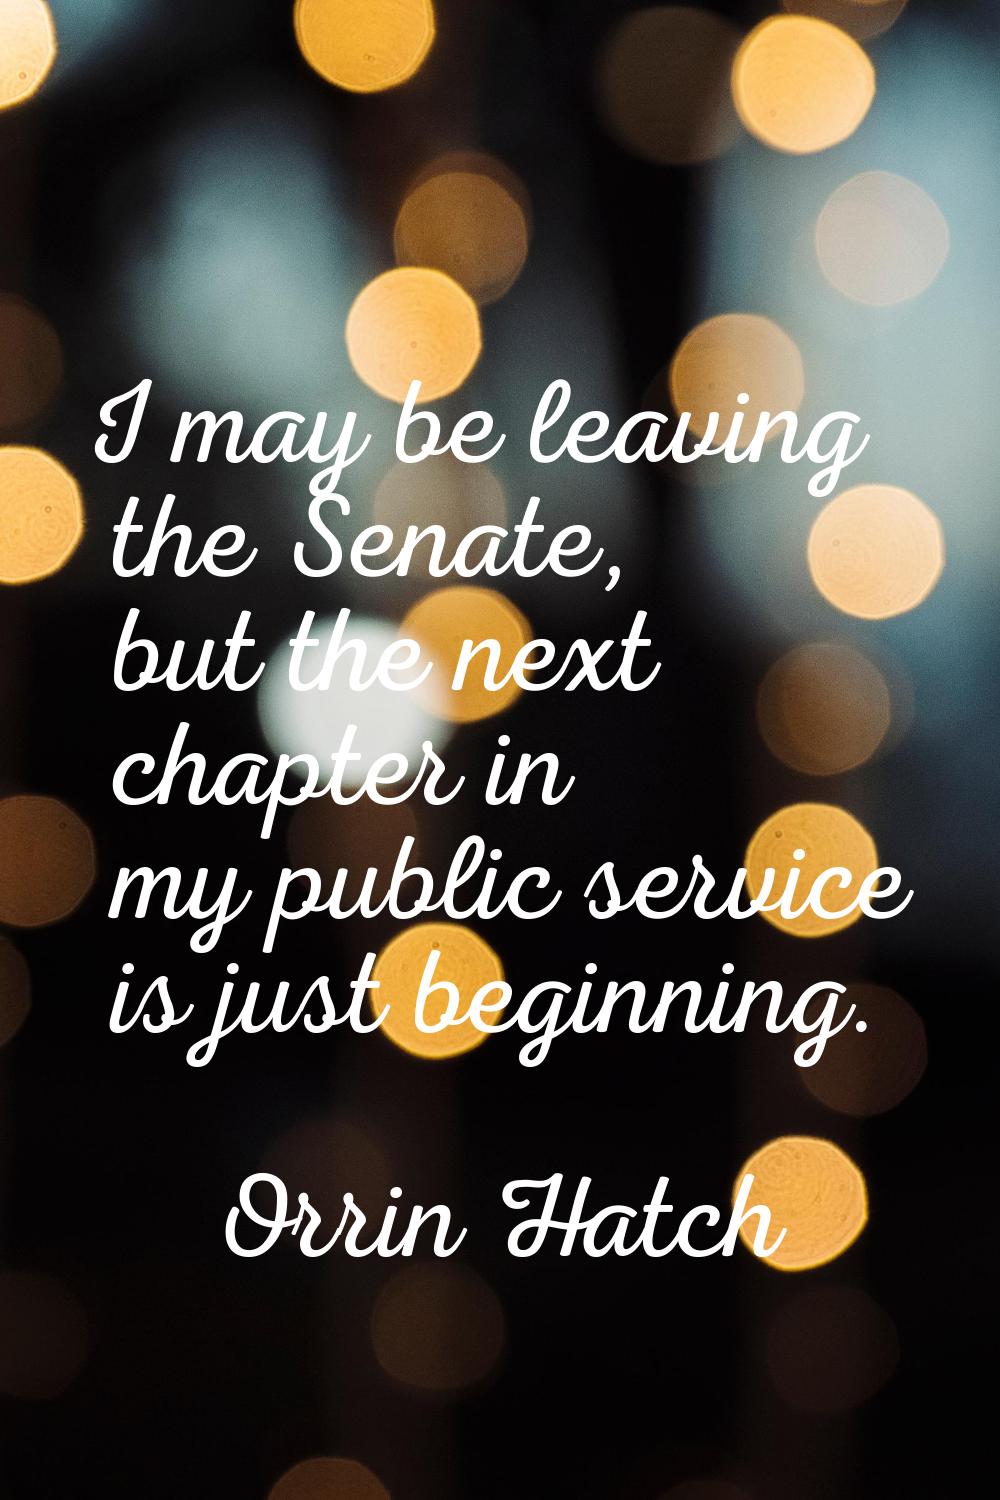 I may be leaving the Senate, but the next chapter in my public service is just beginning.